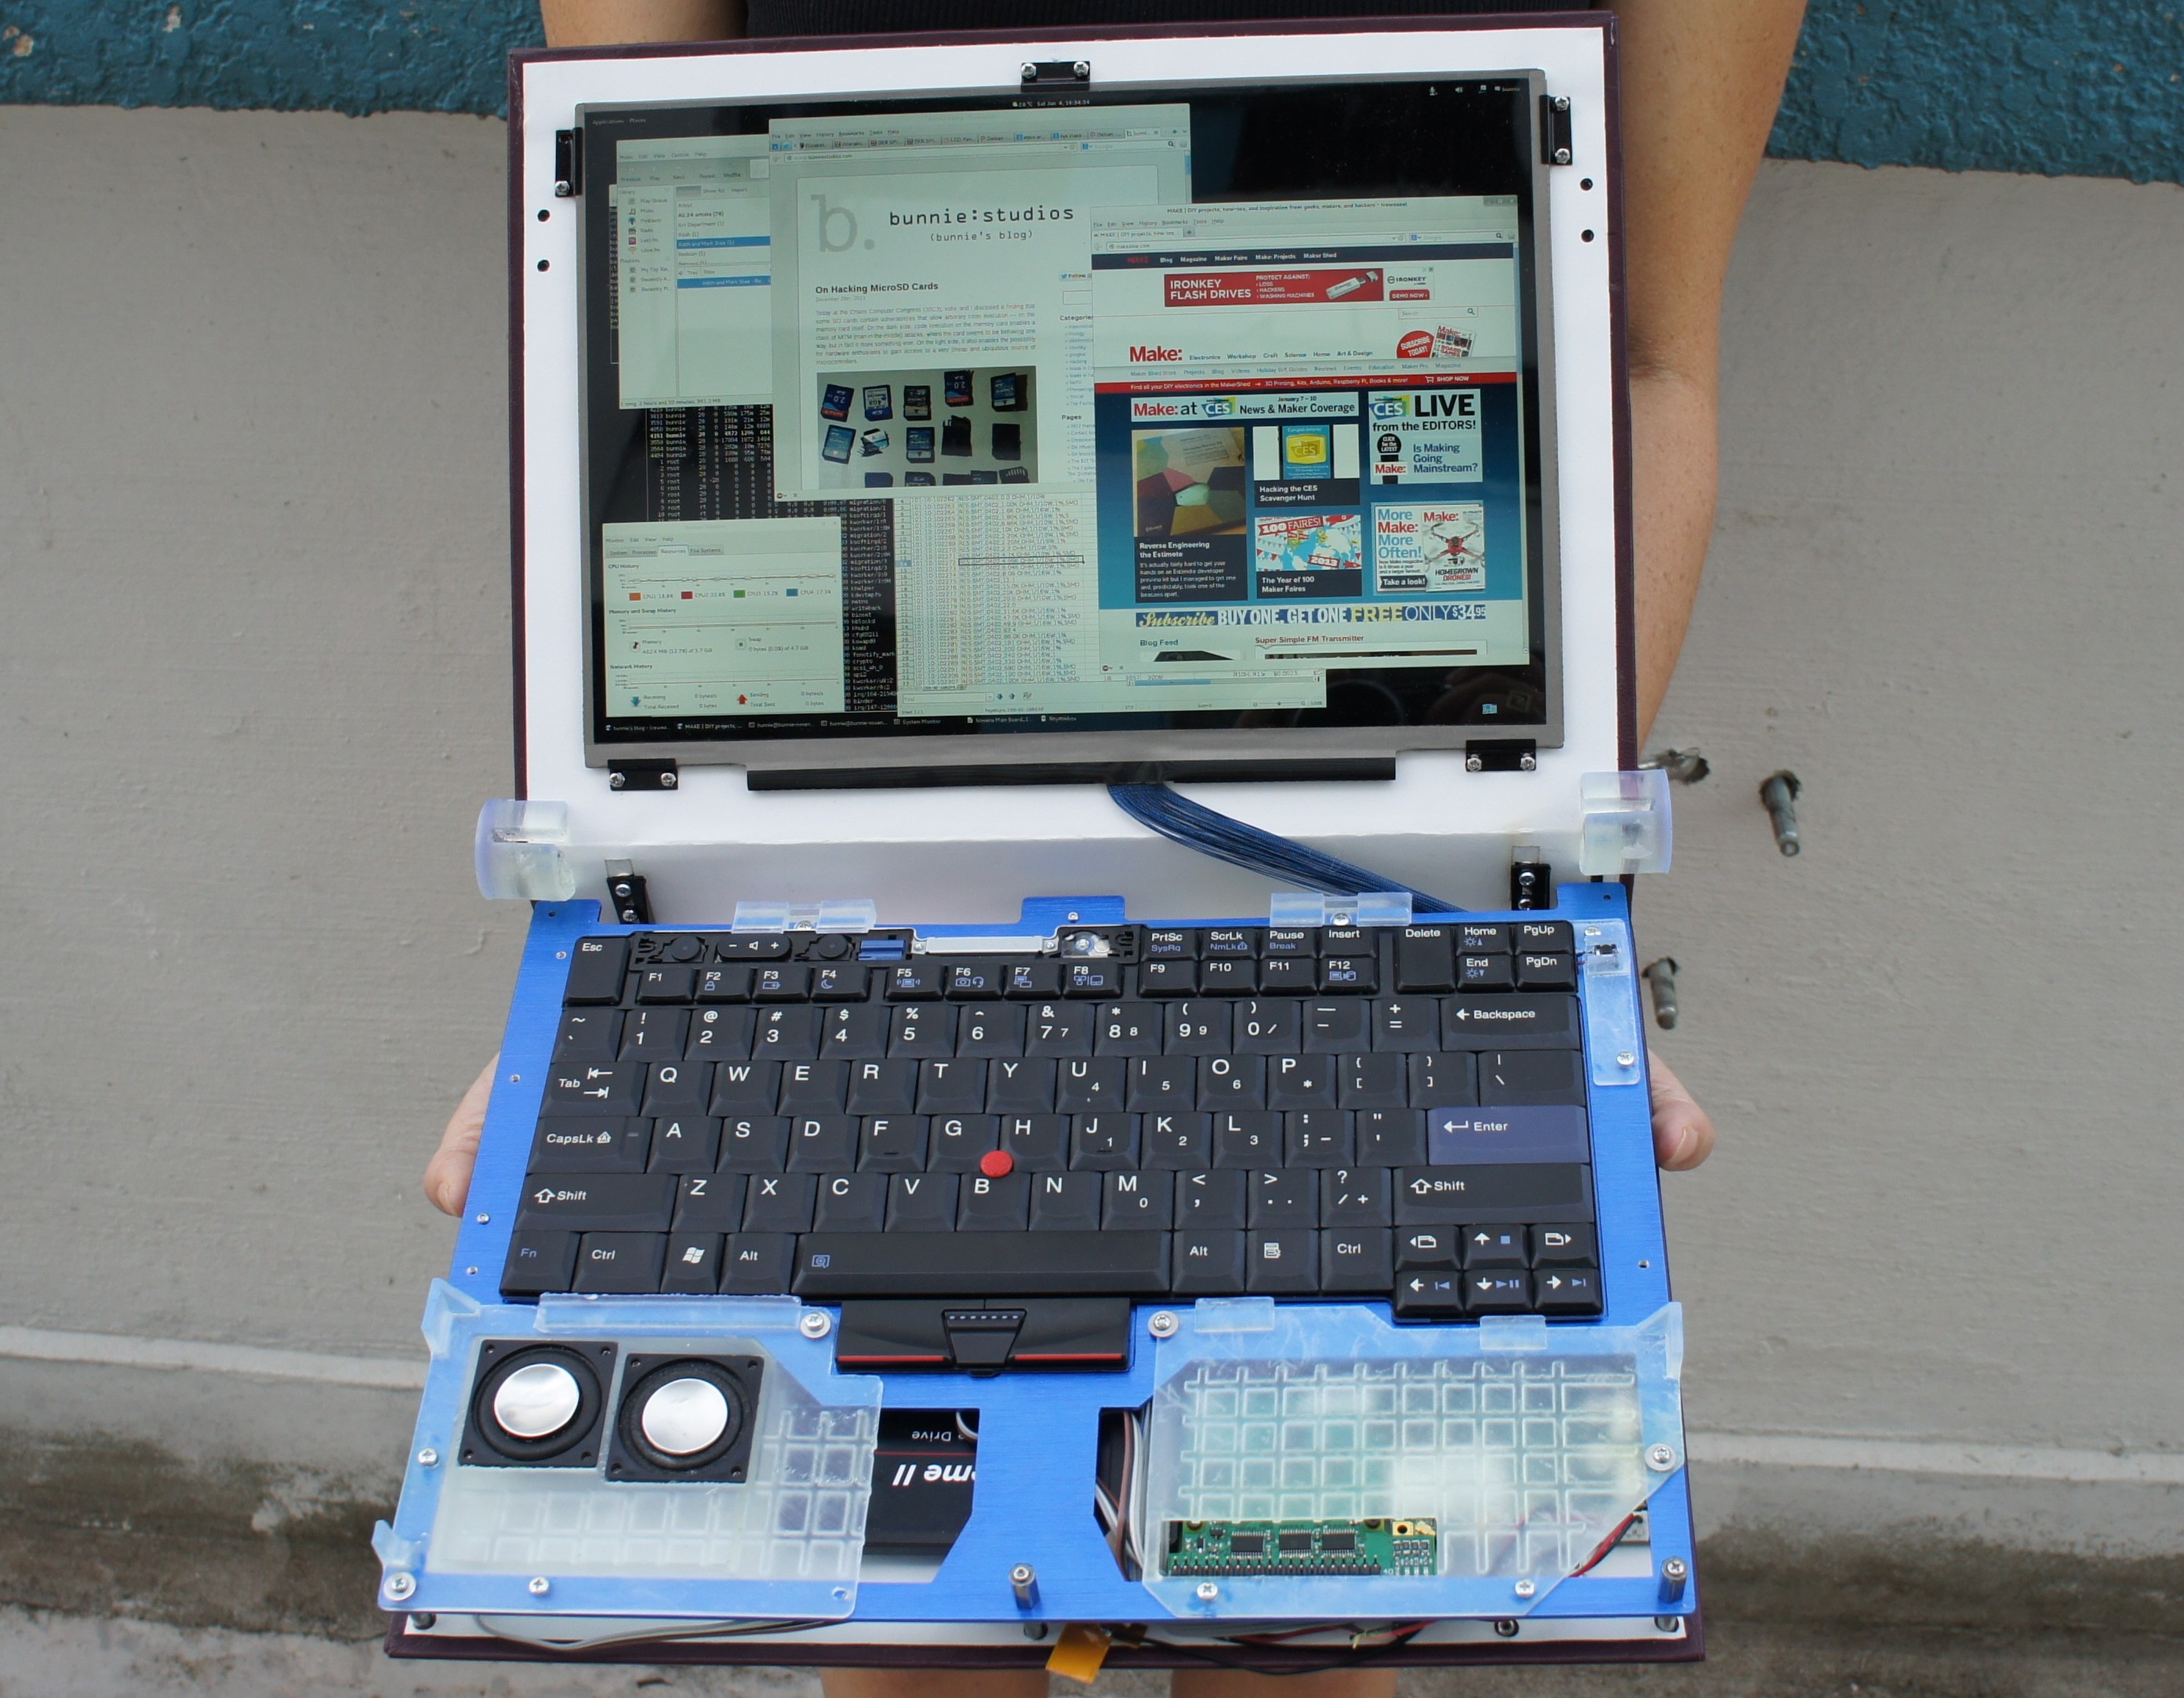 Novena Project Shows You How to Build Your Own Open Source Laptop2785 x 2165